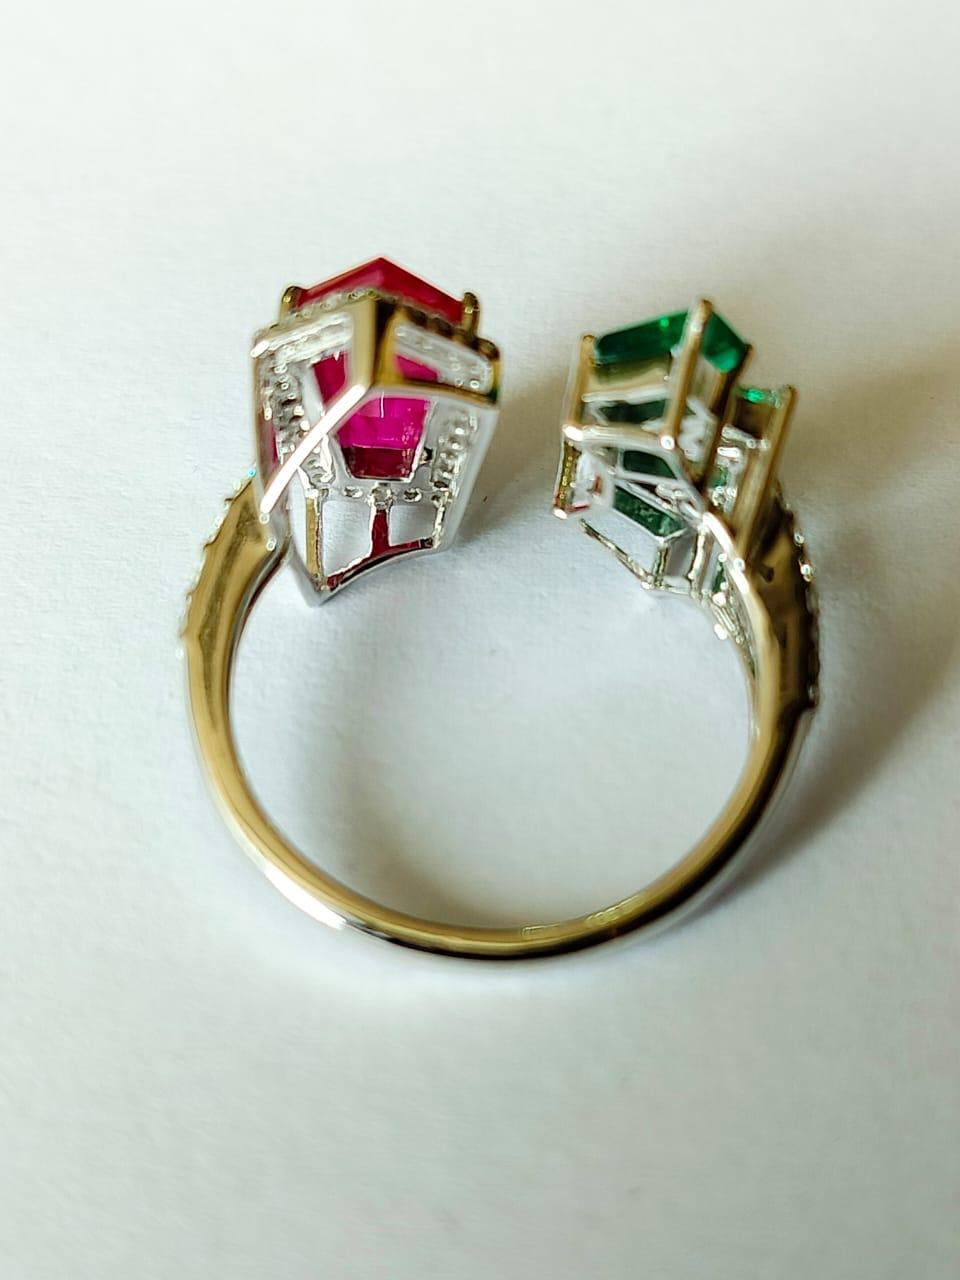 Emerald Cut Set in 18K Gold, 1.41 carats natural Ruby, Emerald & Diamonds Engagement Ring For Sale